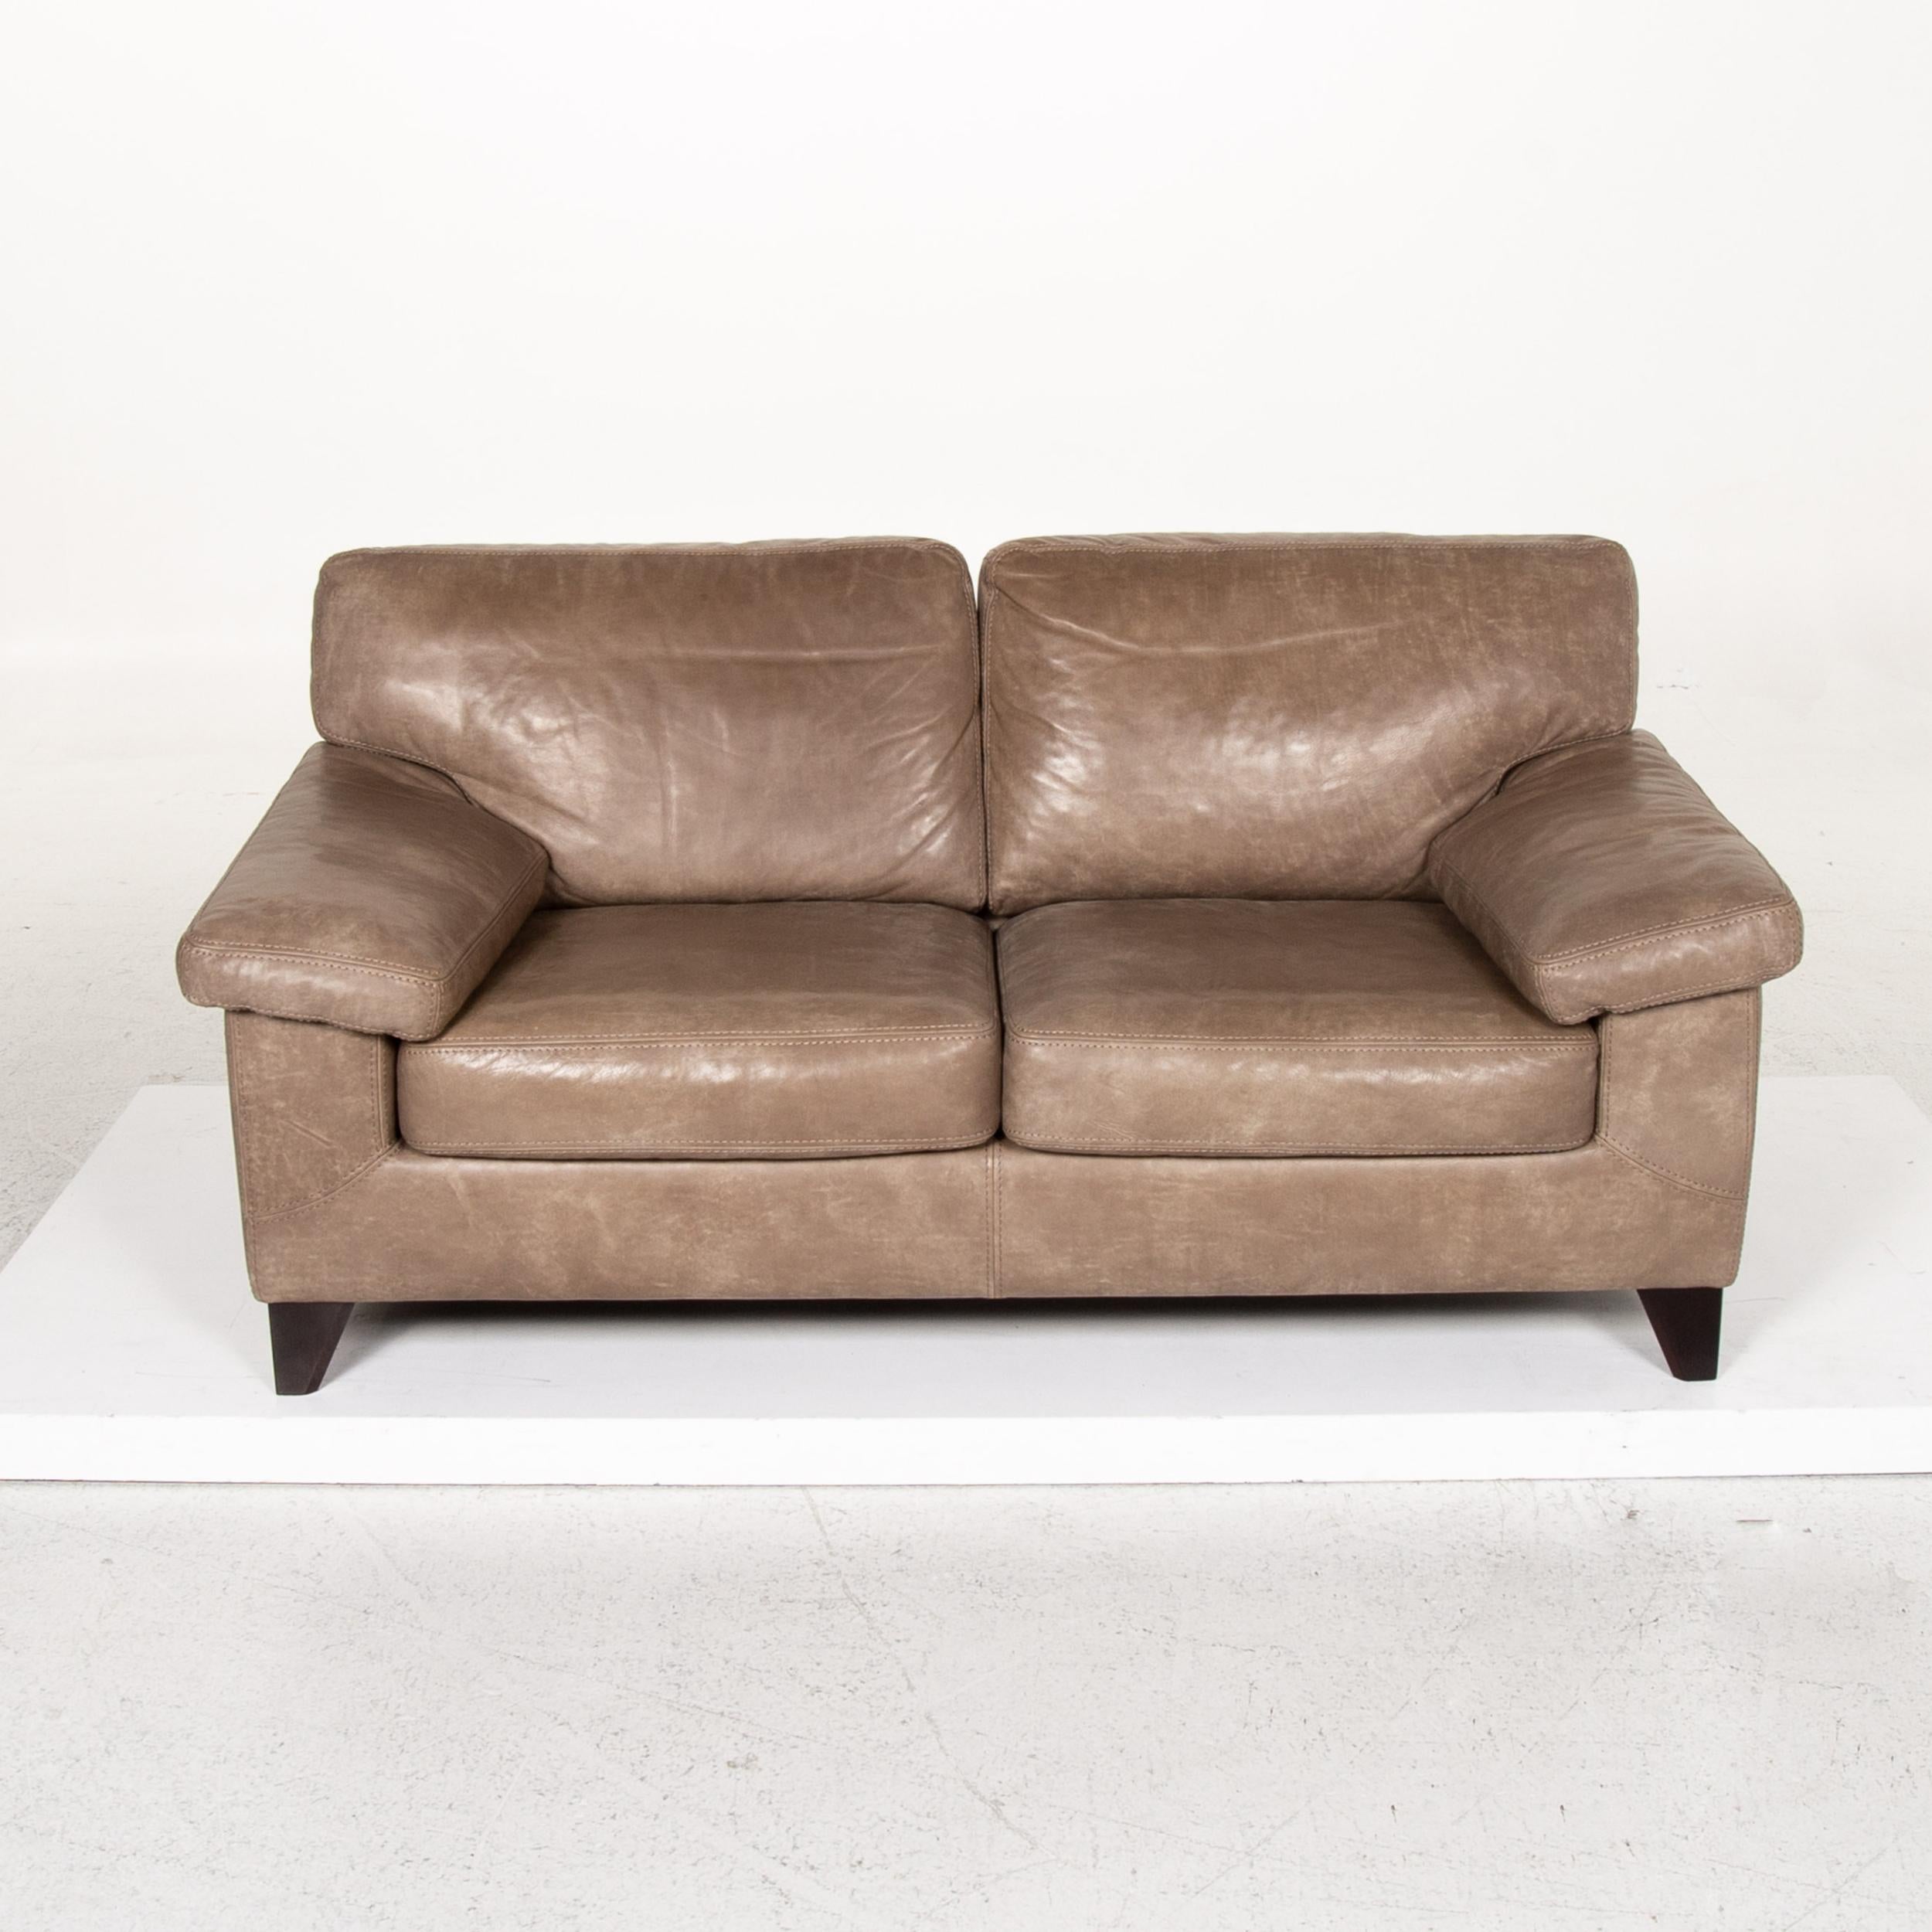 Machalke Diego Leather Sofa Brown Two-Seat Couch Teun Van Zanten In Good Condition For Sale In Cologne, DE